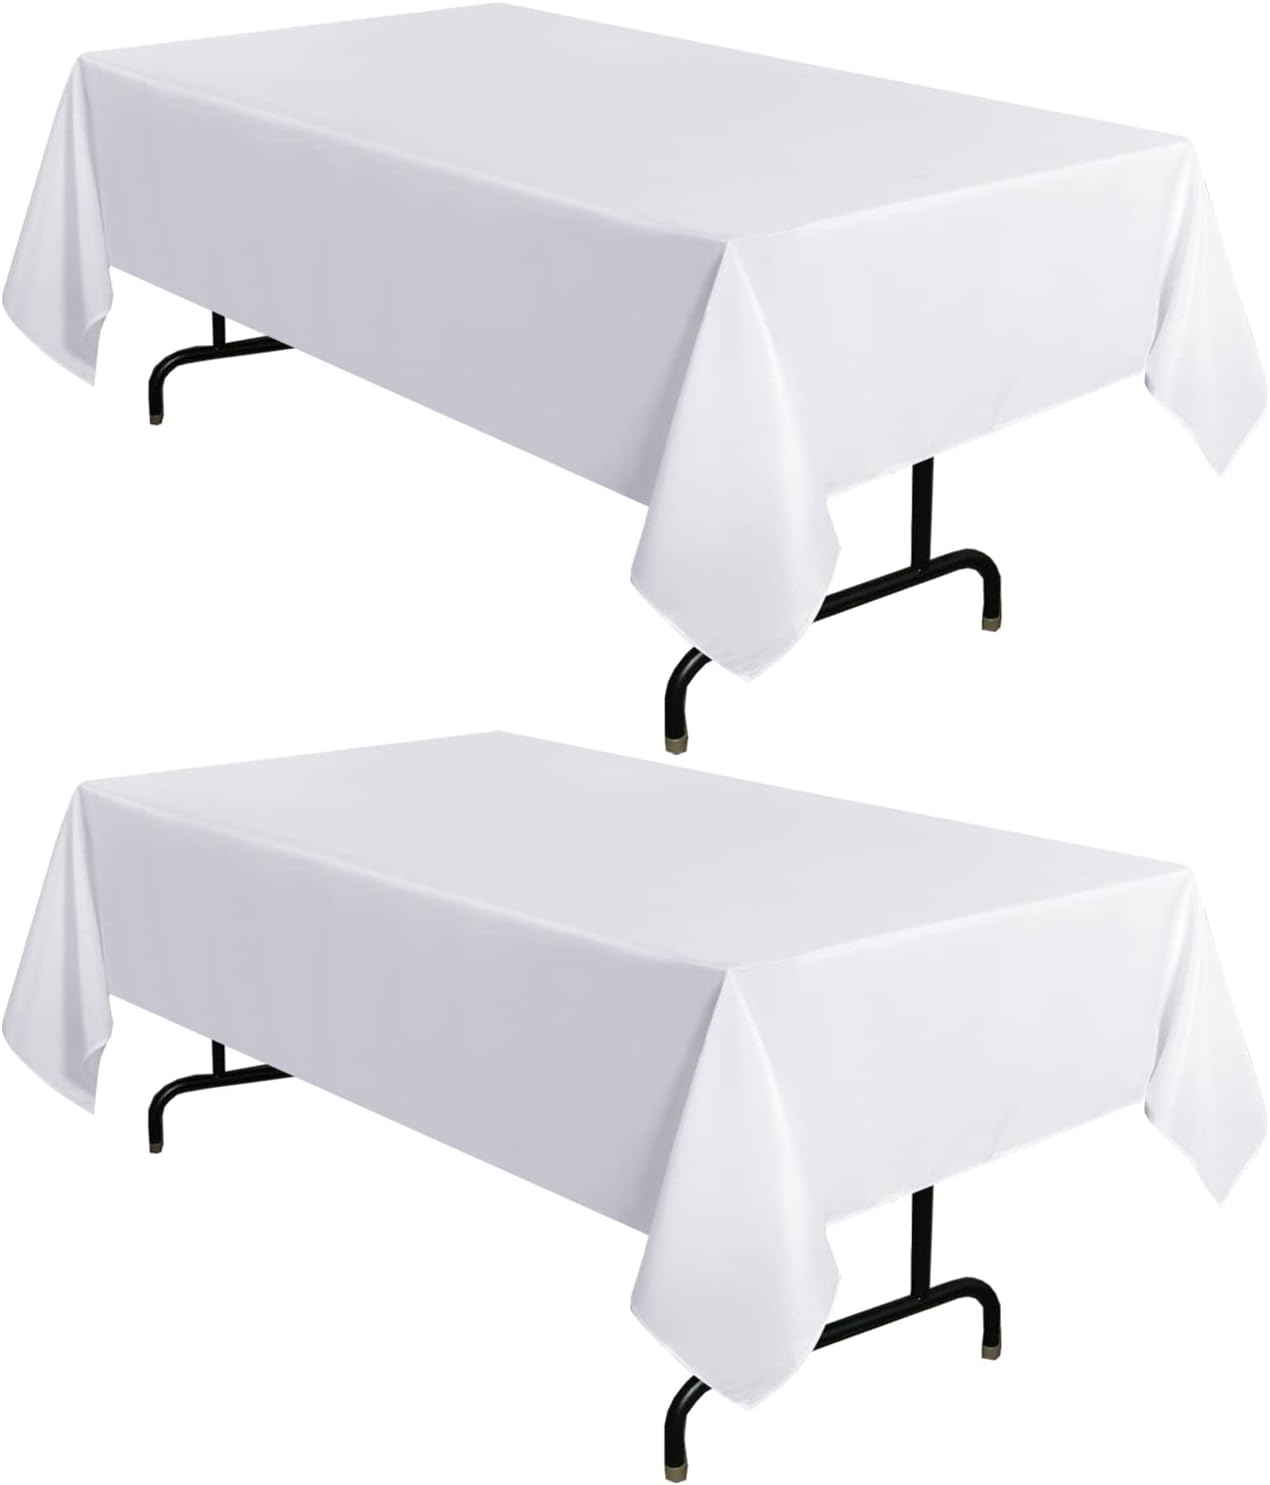 sancua 2 Pack White Tablecloth 60 x 102 Inch, Rectangle 6 Feet Table Cloth - Stain and Wrinkle Resistant Washable Polyester Table Cover for Dining Table, Buffet Parties and Camping